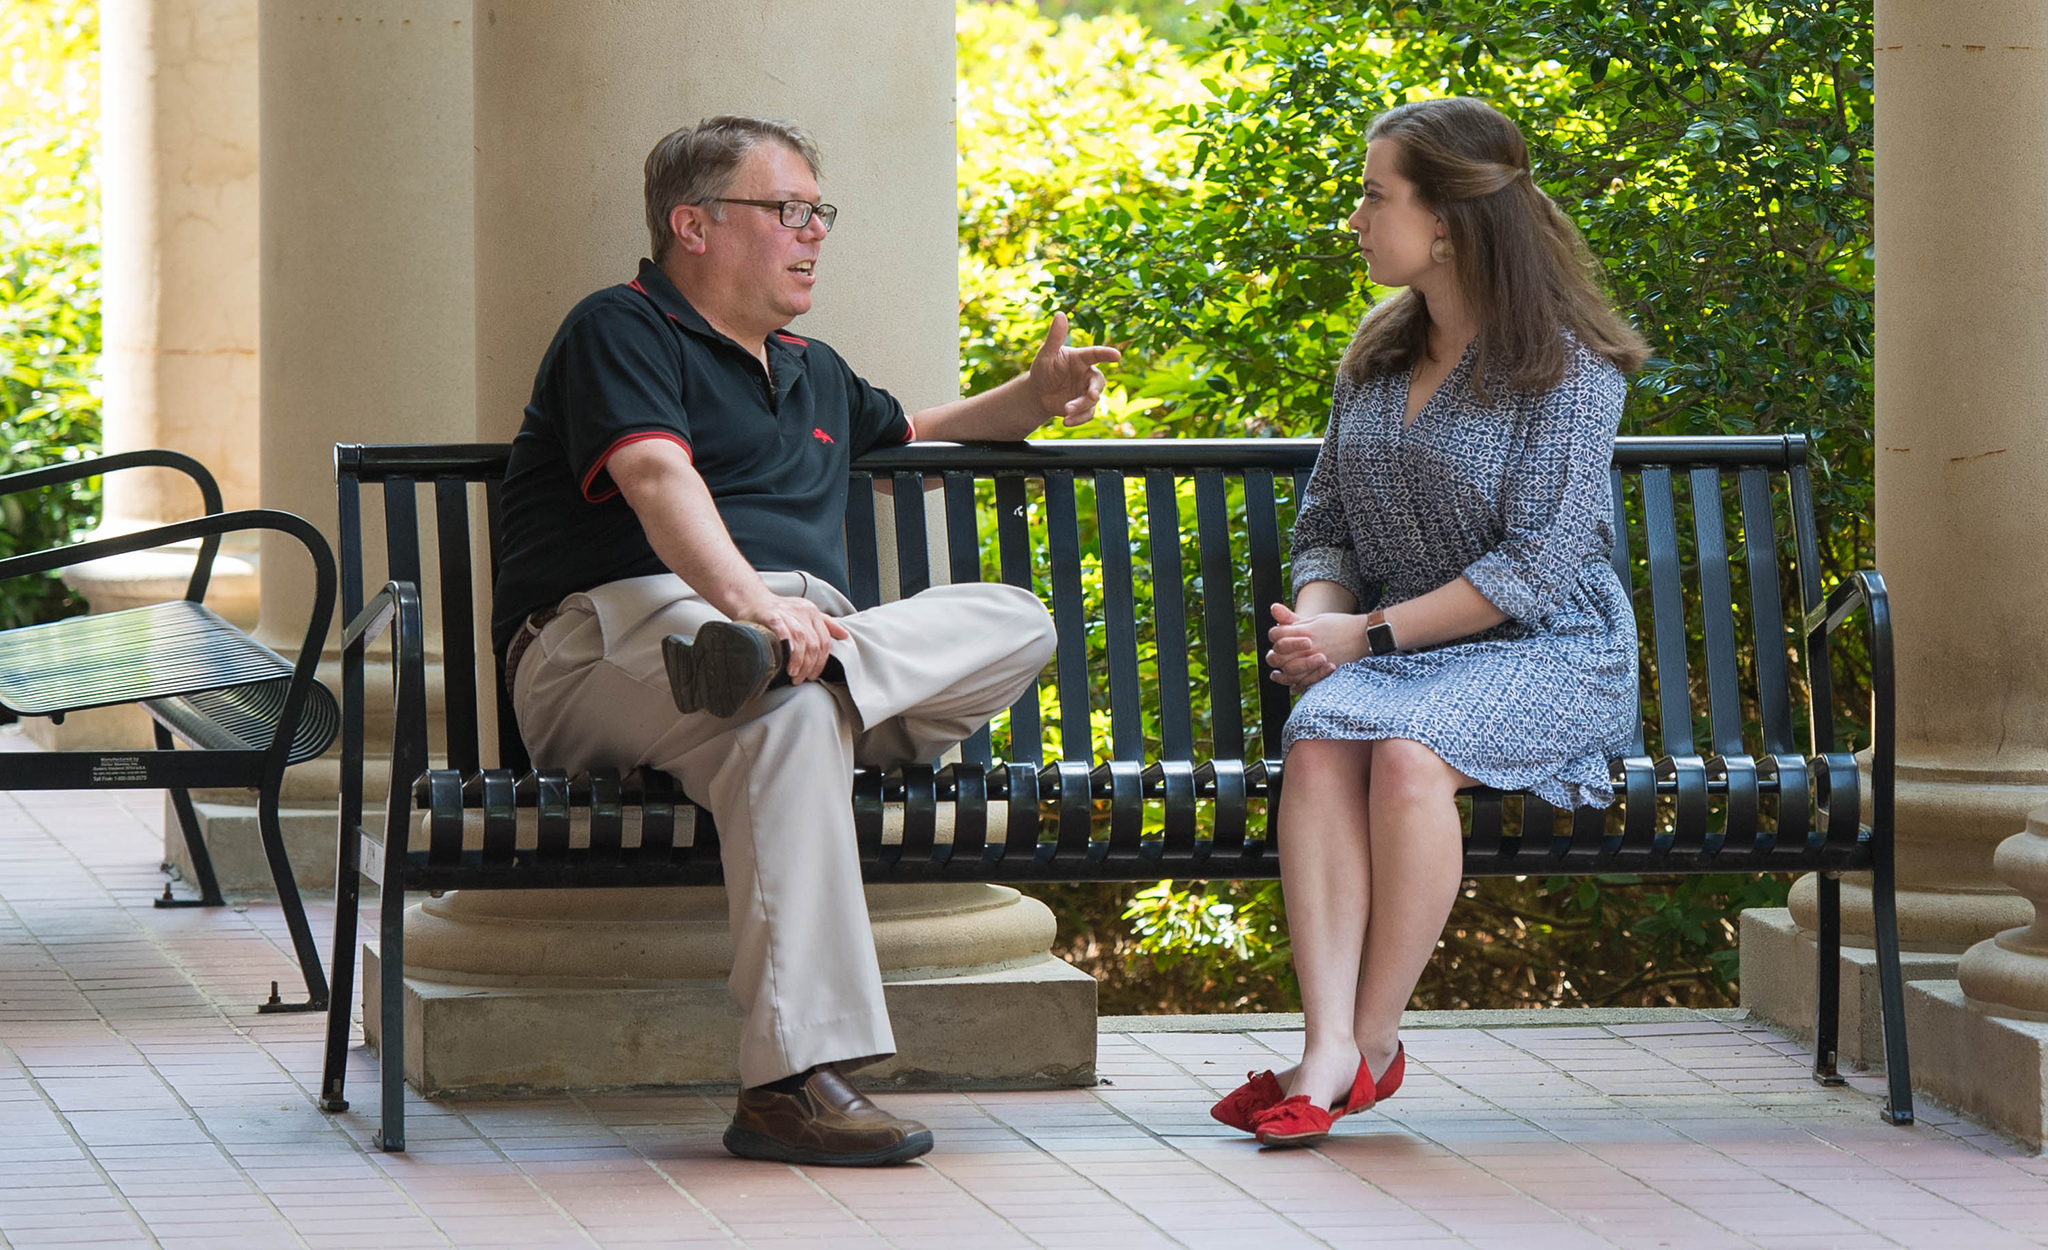 Daniel O’Sullivan, chair and professor of modern languages at the University of Mississippi, chats with Millie Morse, a former student in the program. 